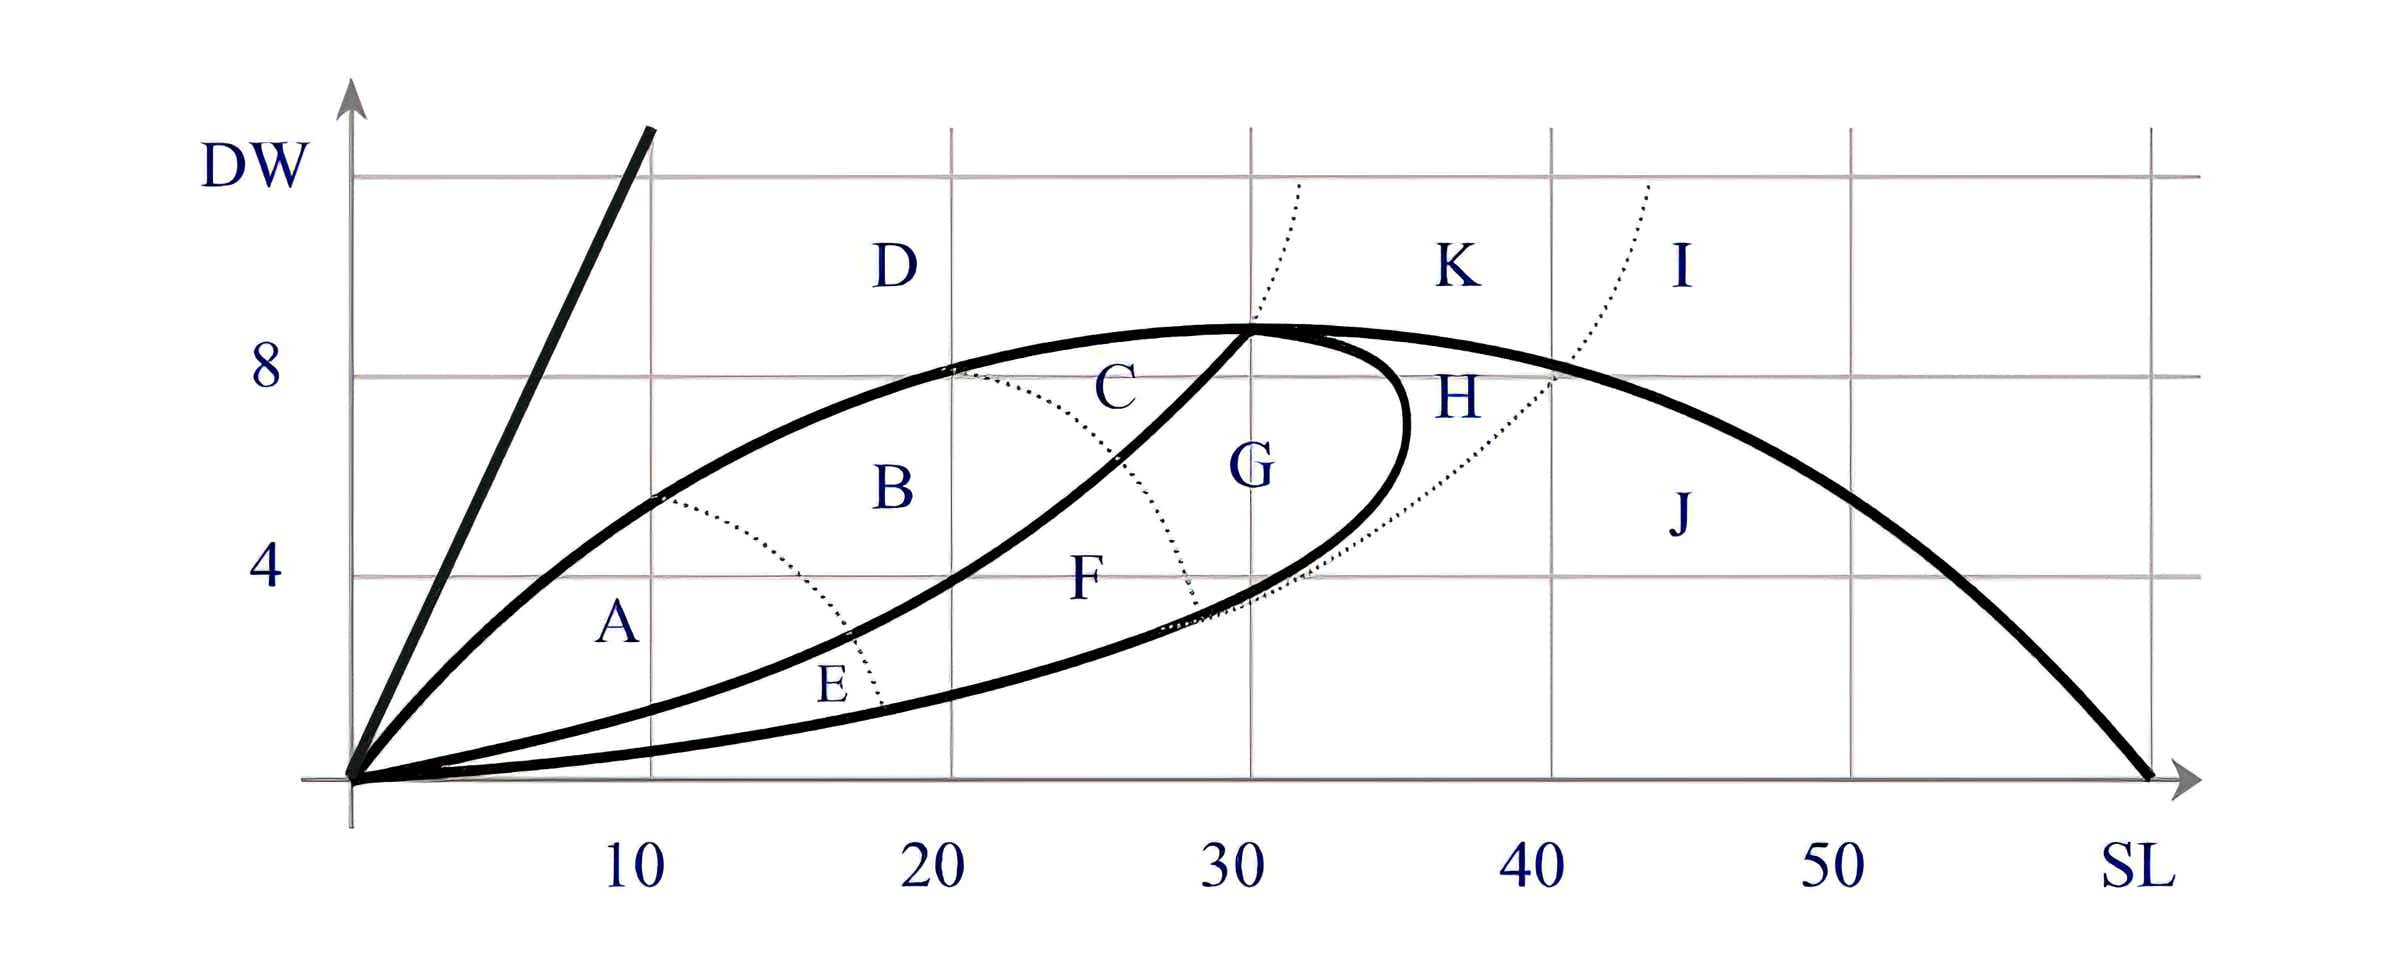 This graph is a remnant of research that plotted the conceptual accessibility of written text according to sentence length and DW, where the graph itself despicts that area divided into 11 sectors (A-K) based on curves drawn.